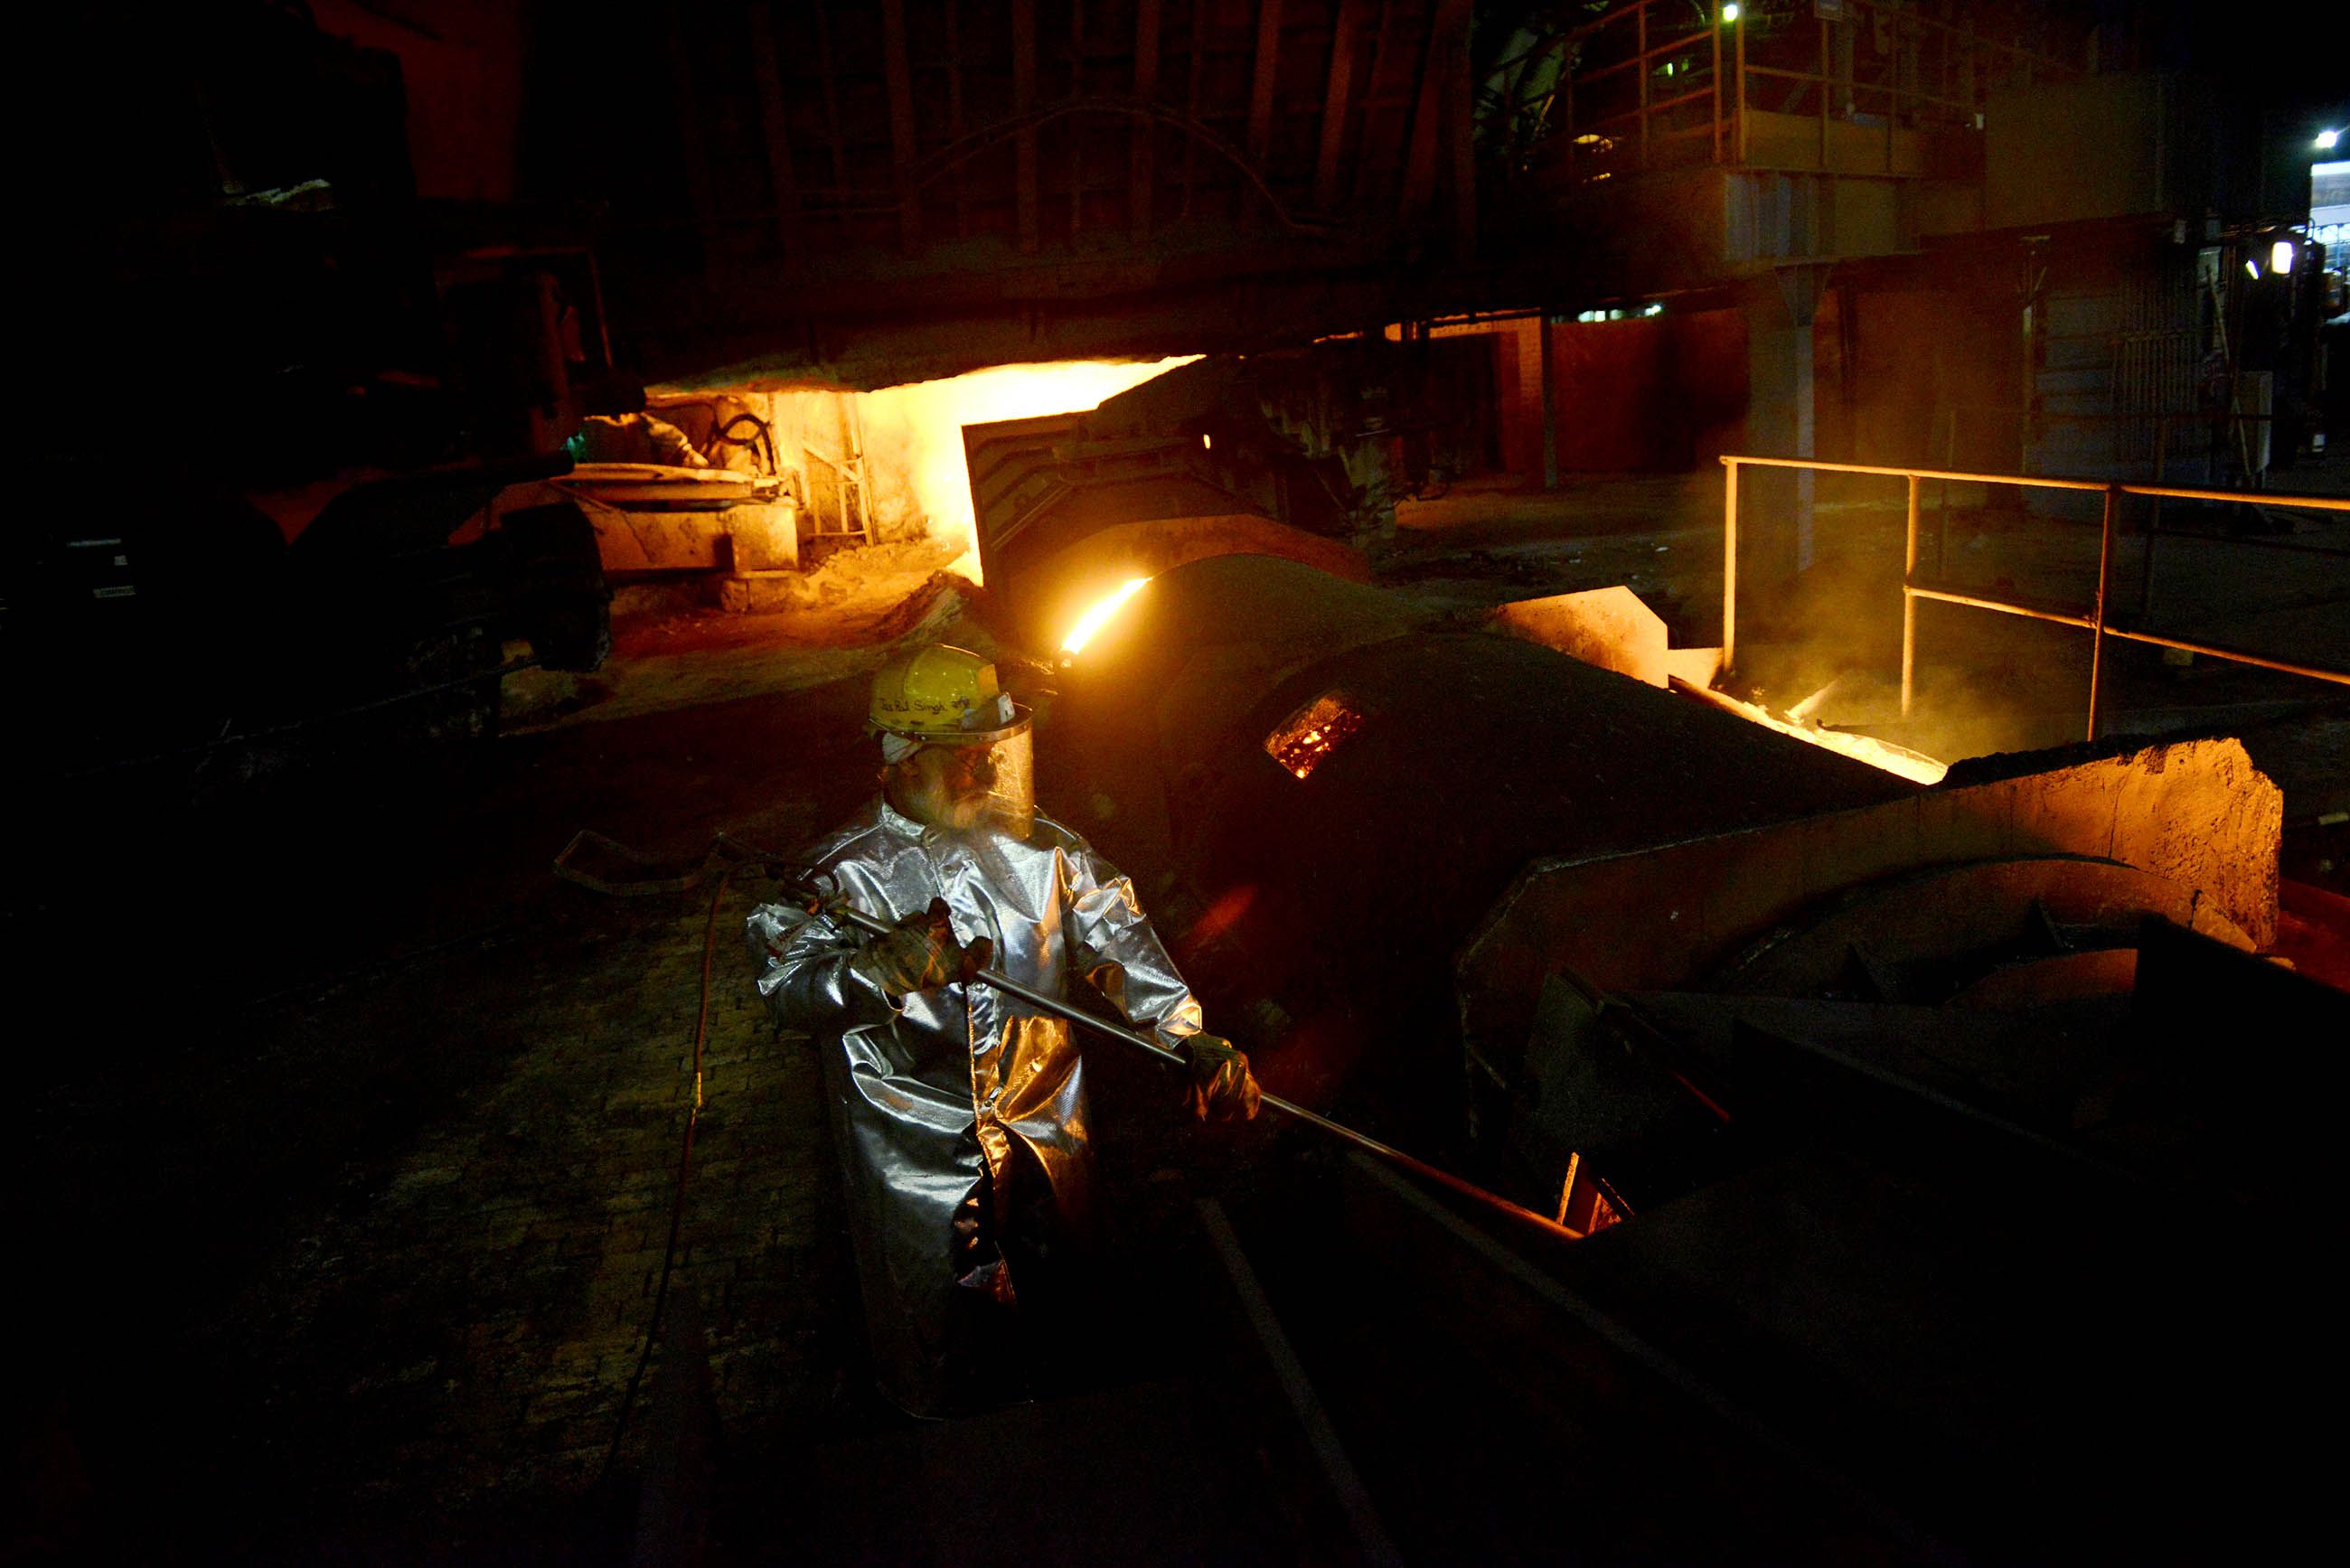 A Tata Steel worker checks the temperature of the one of the plant's seven blast furnaces during an afternoon. Image by Michael Henninger. India, 2016.